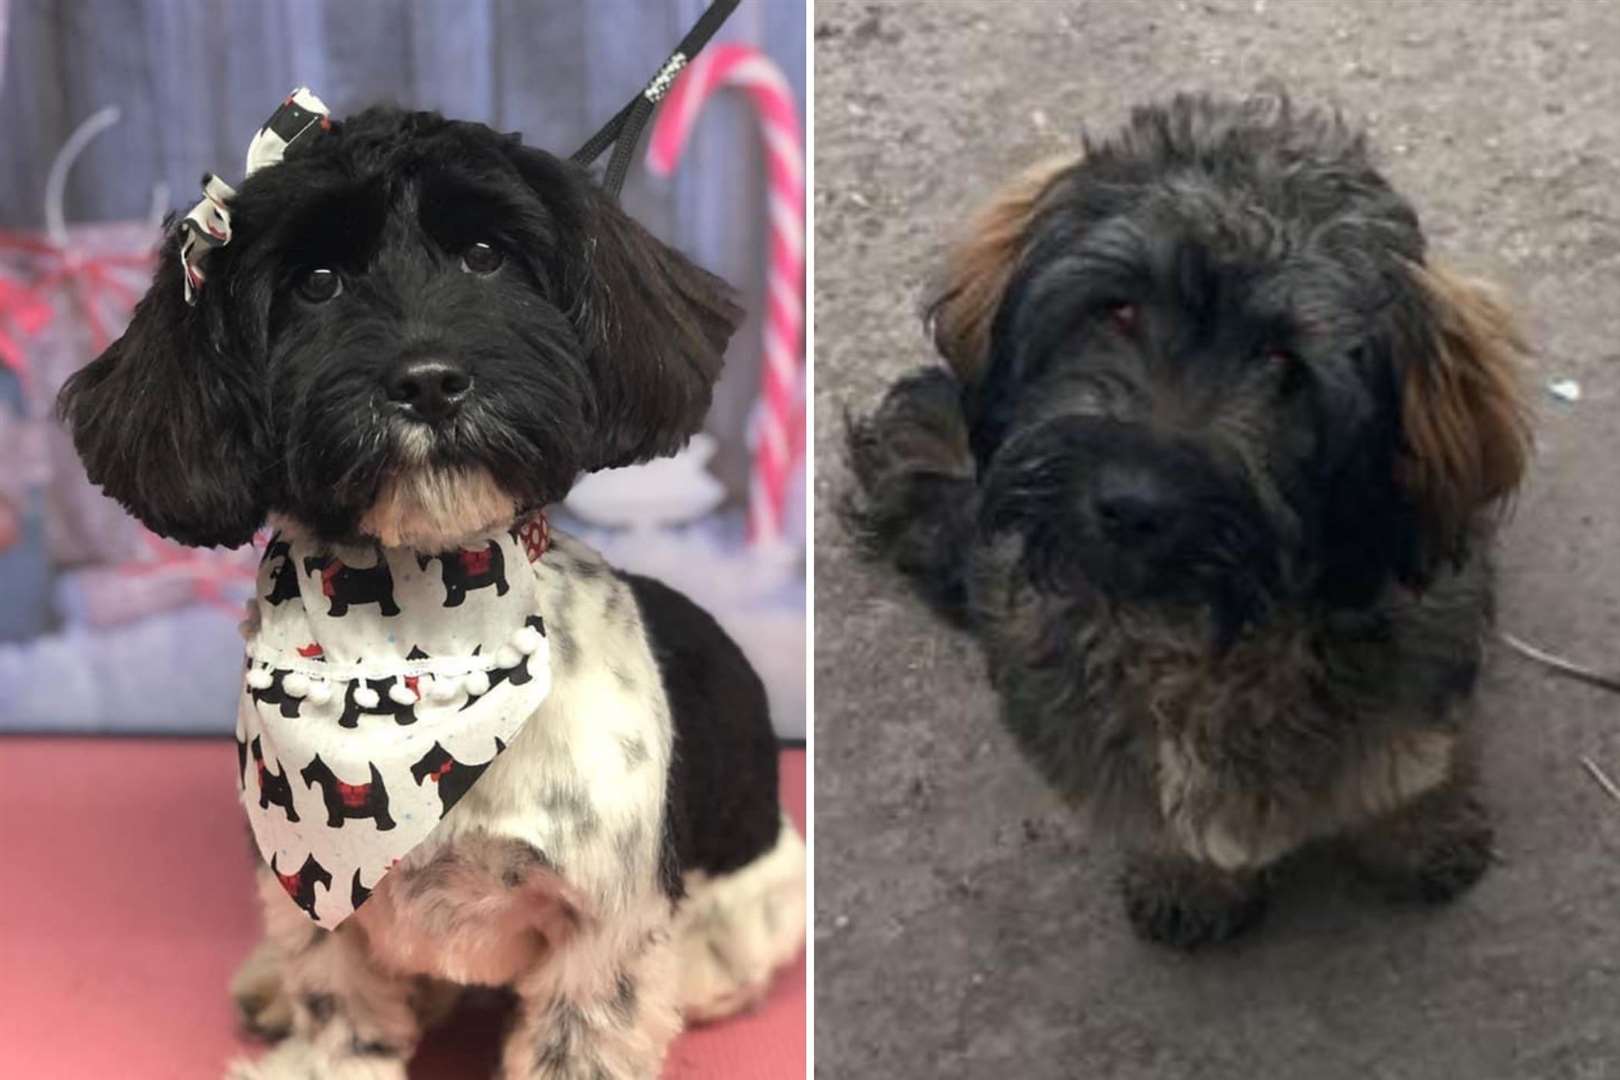 Darlin (left) and Darcie have been reported stolen from their home in Chilham, near Canterbury